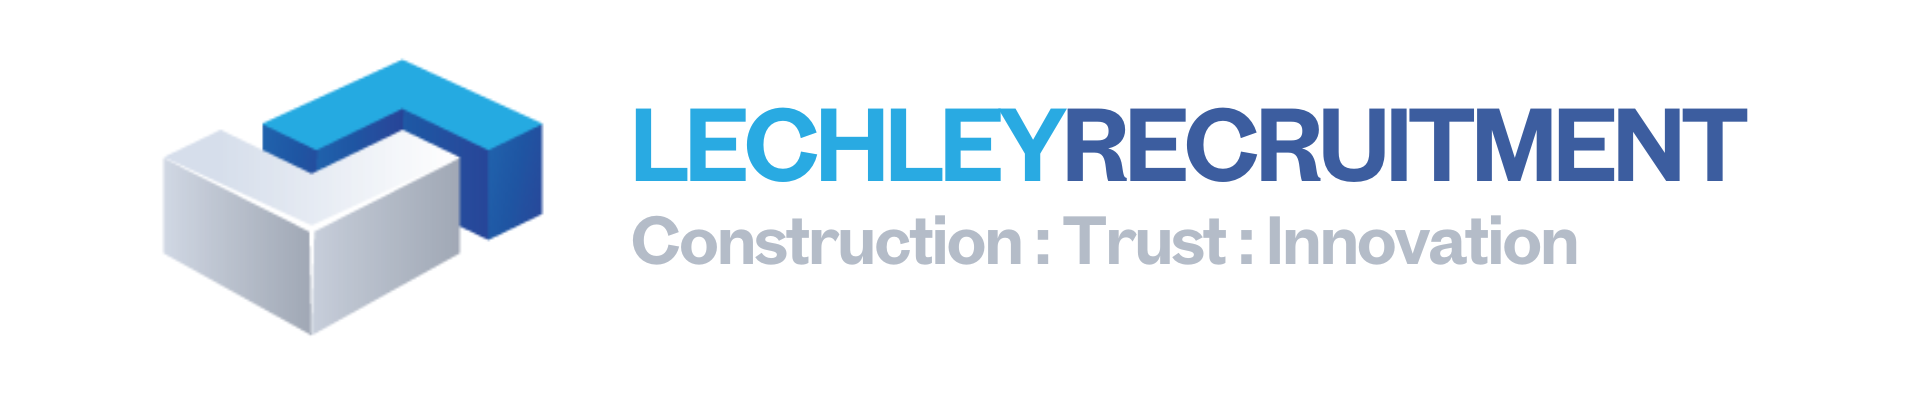 The logo for lechley associates recruitment specialists